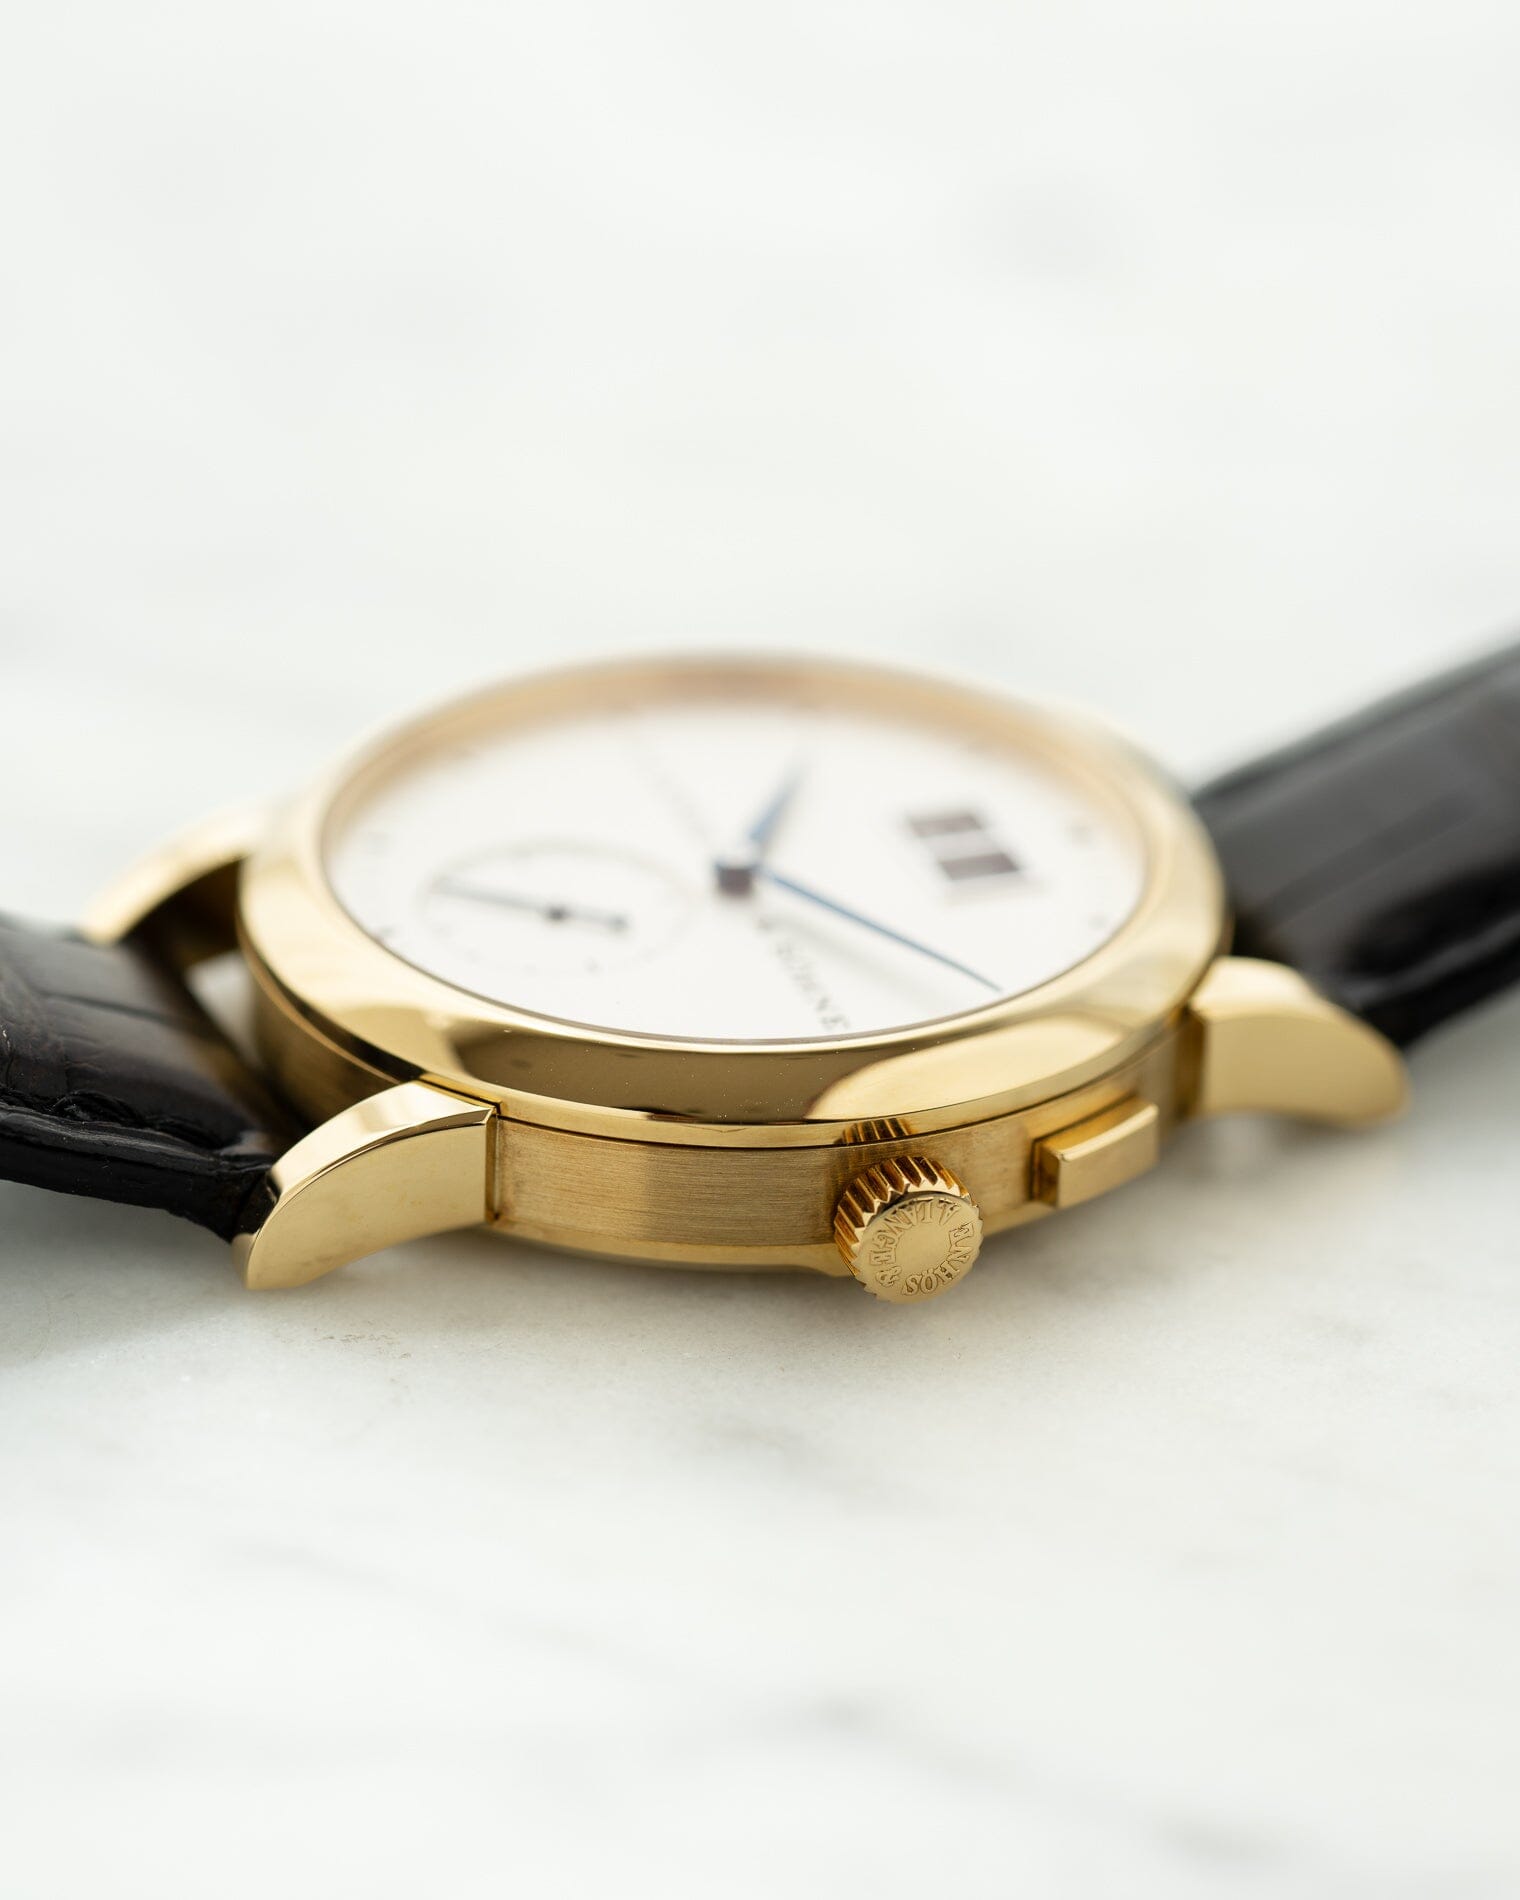 A. Lange & Söhne サクソニア 105.022 YG 箱保証書付き Watch A. LANGE & SOHNE 